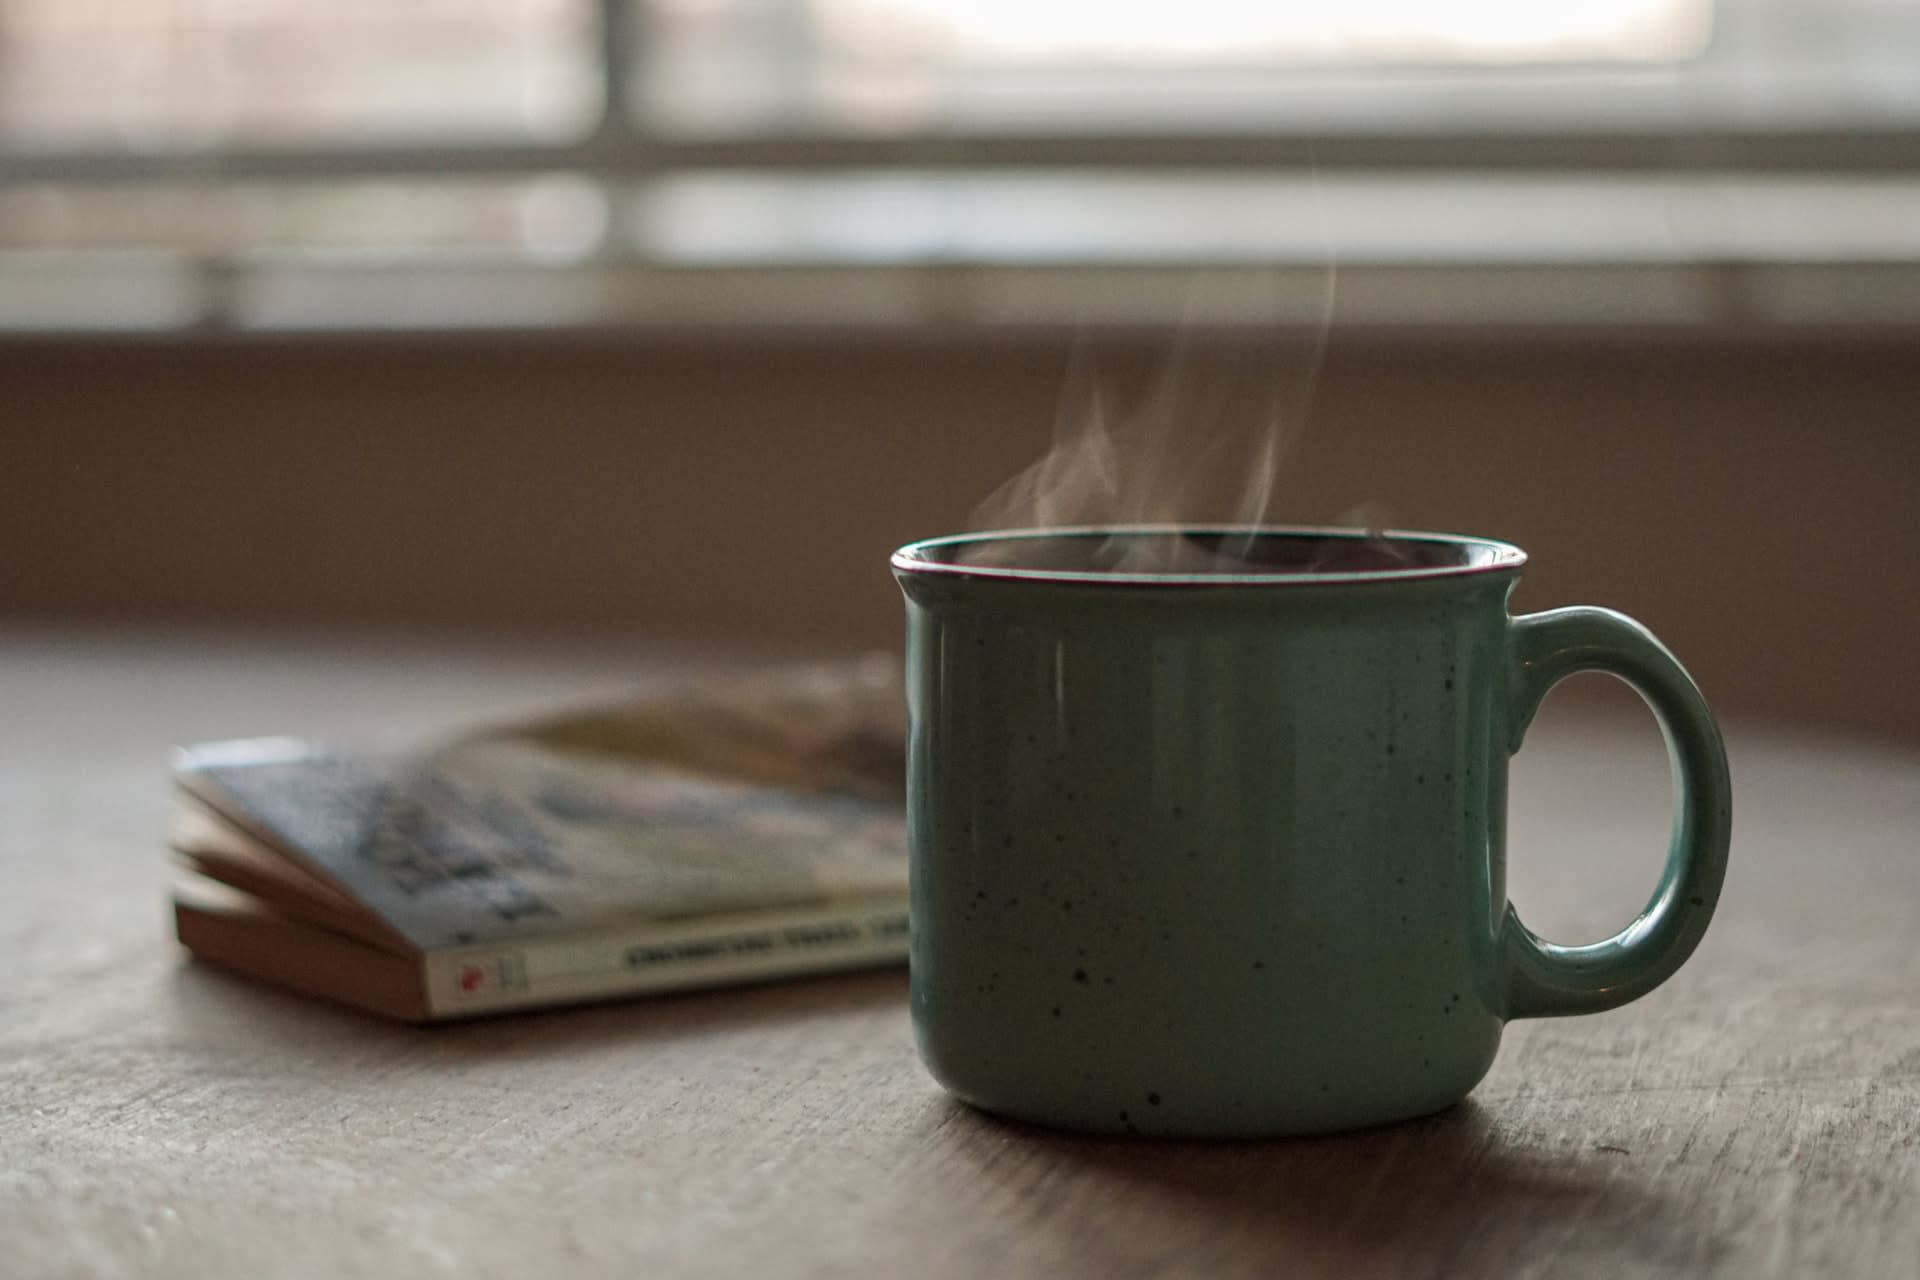 Coffe-filled mug and a book on coffee table